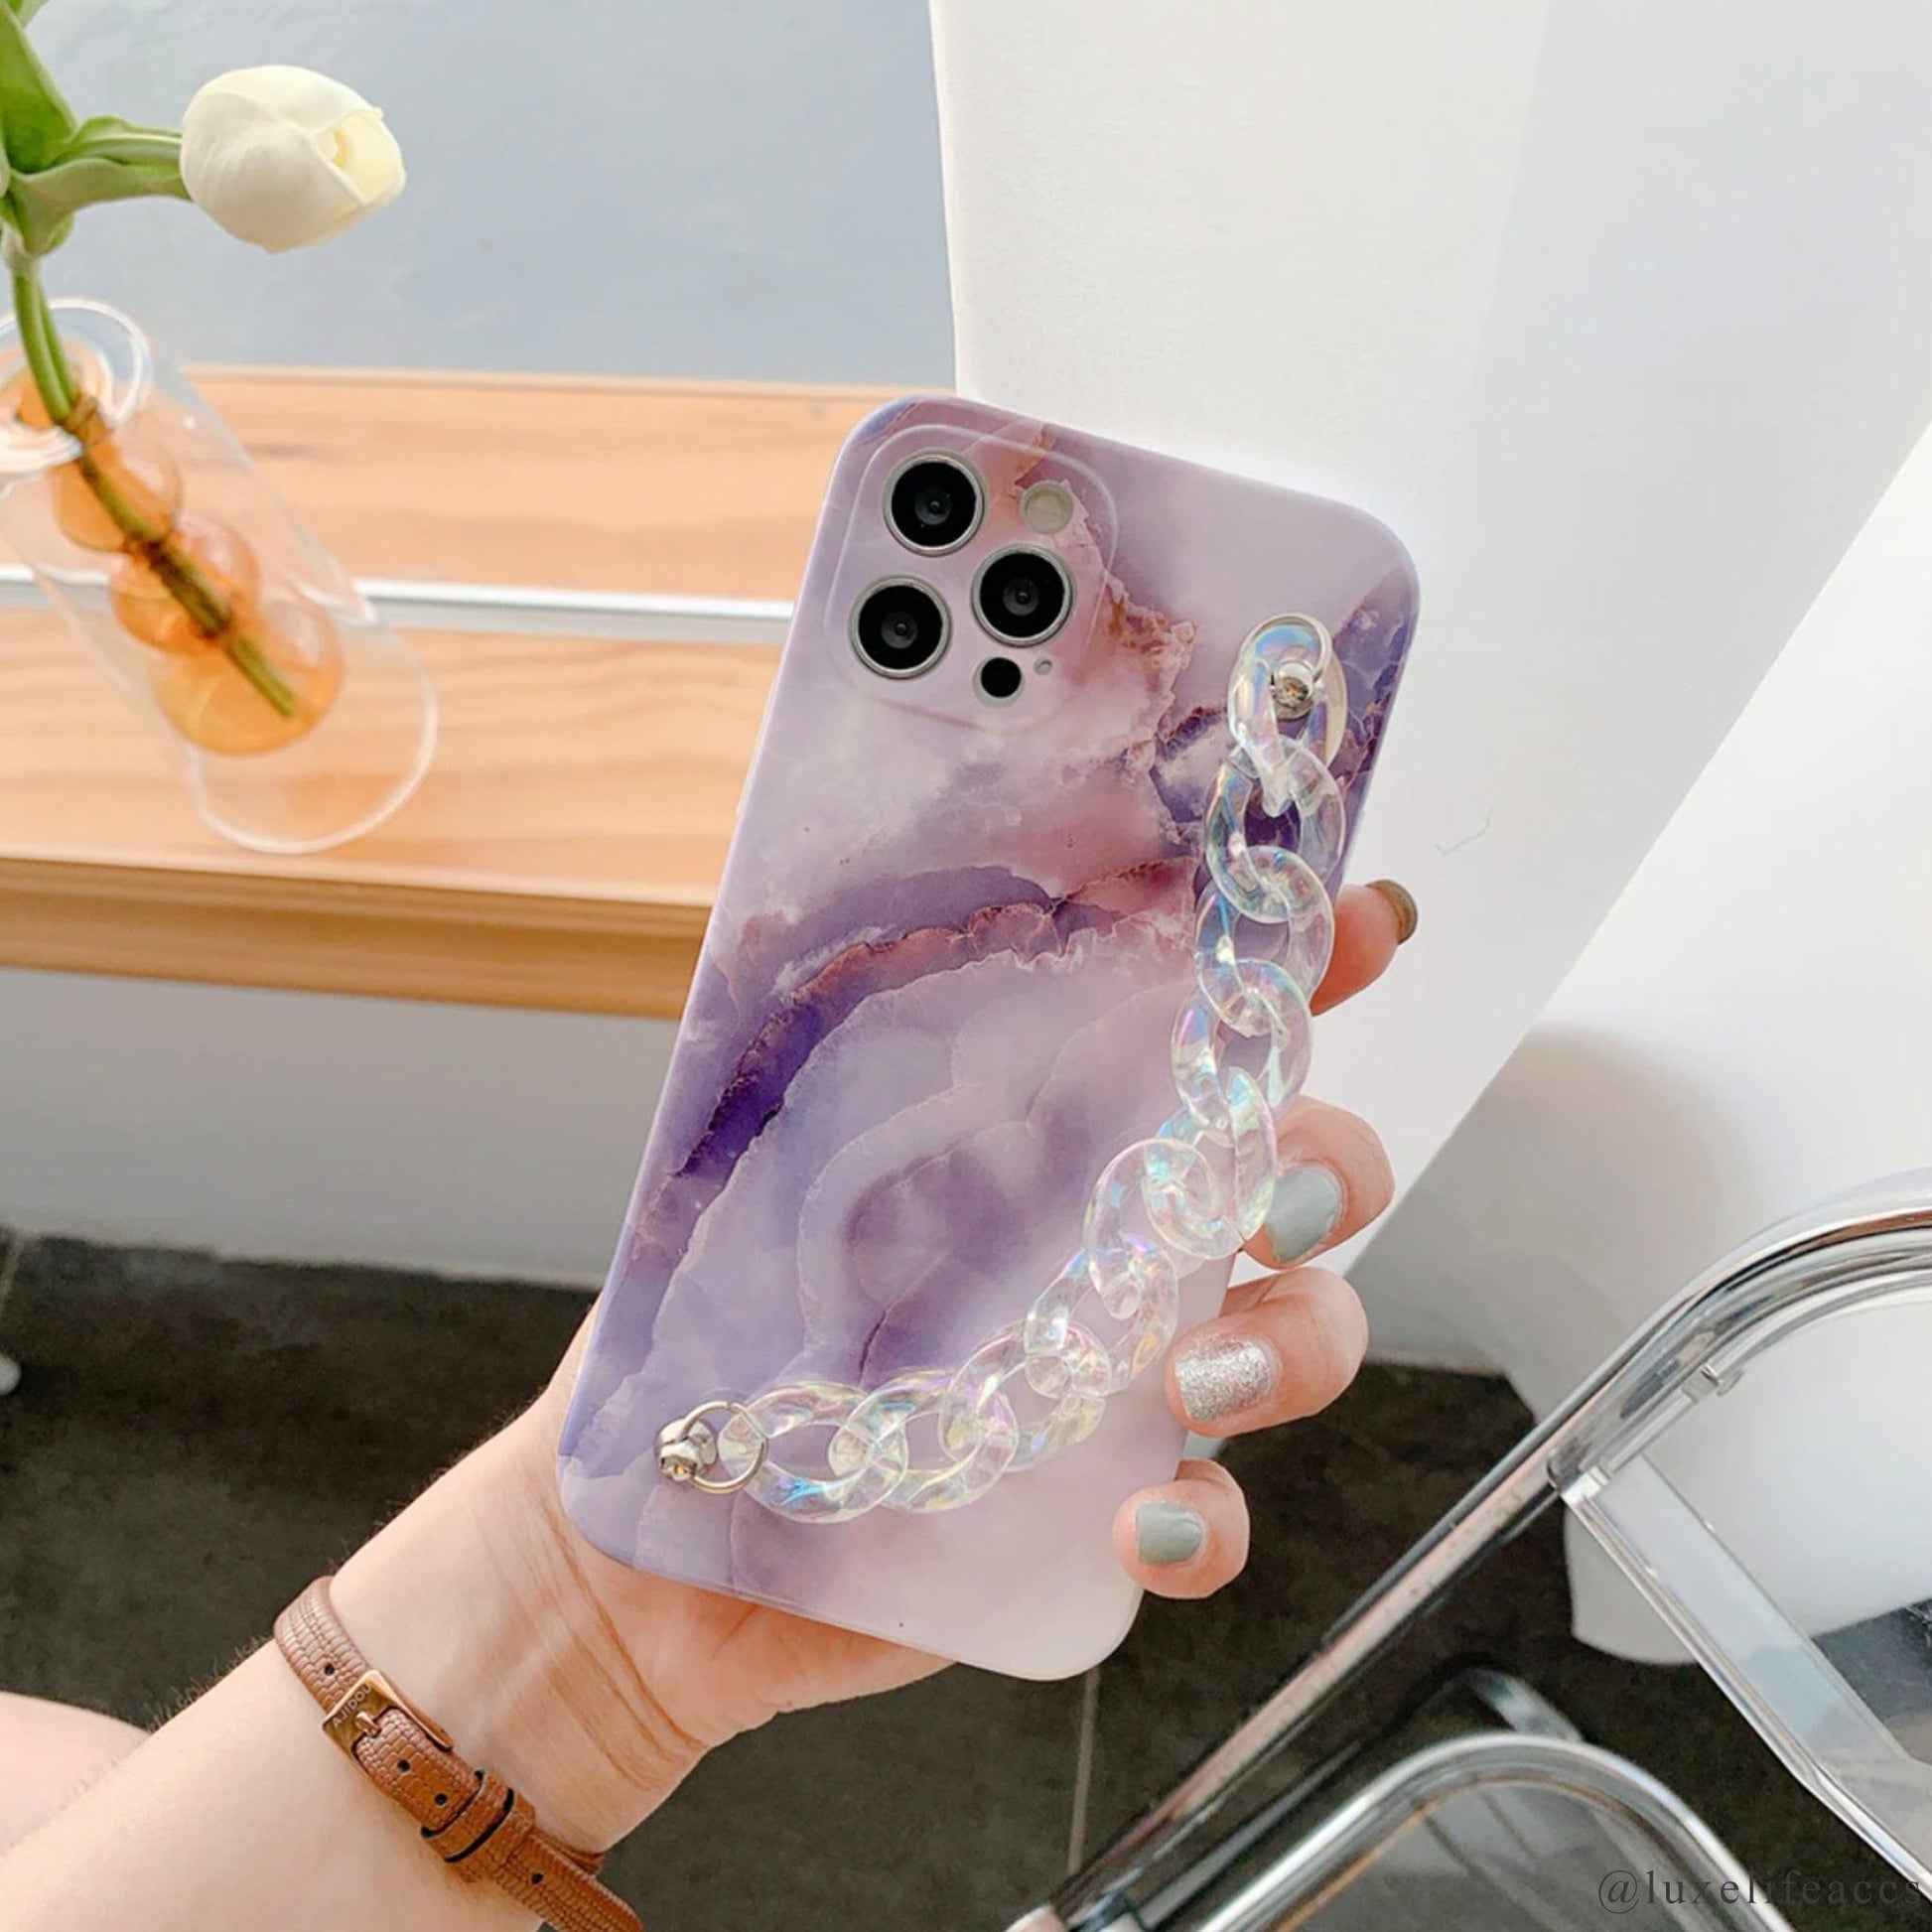 RIVER Marble Resin Chain iPhone Case - Luxe Life Accessories